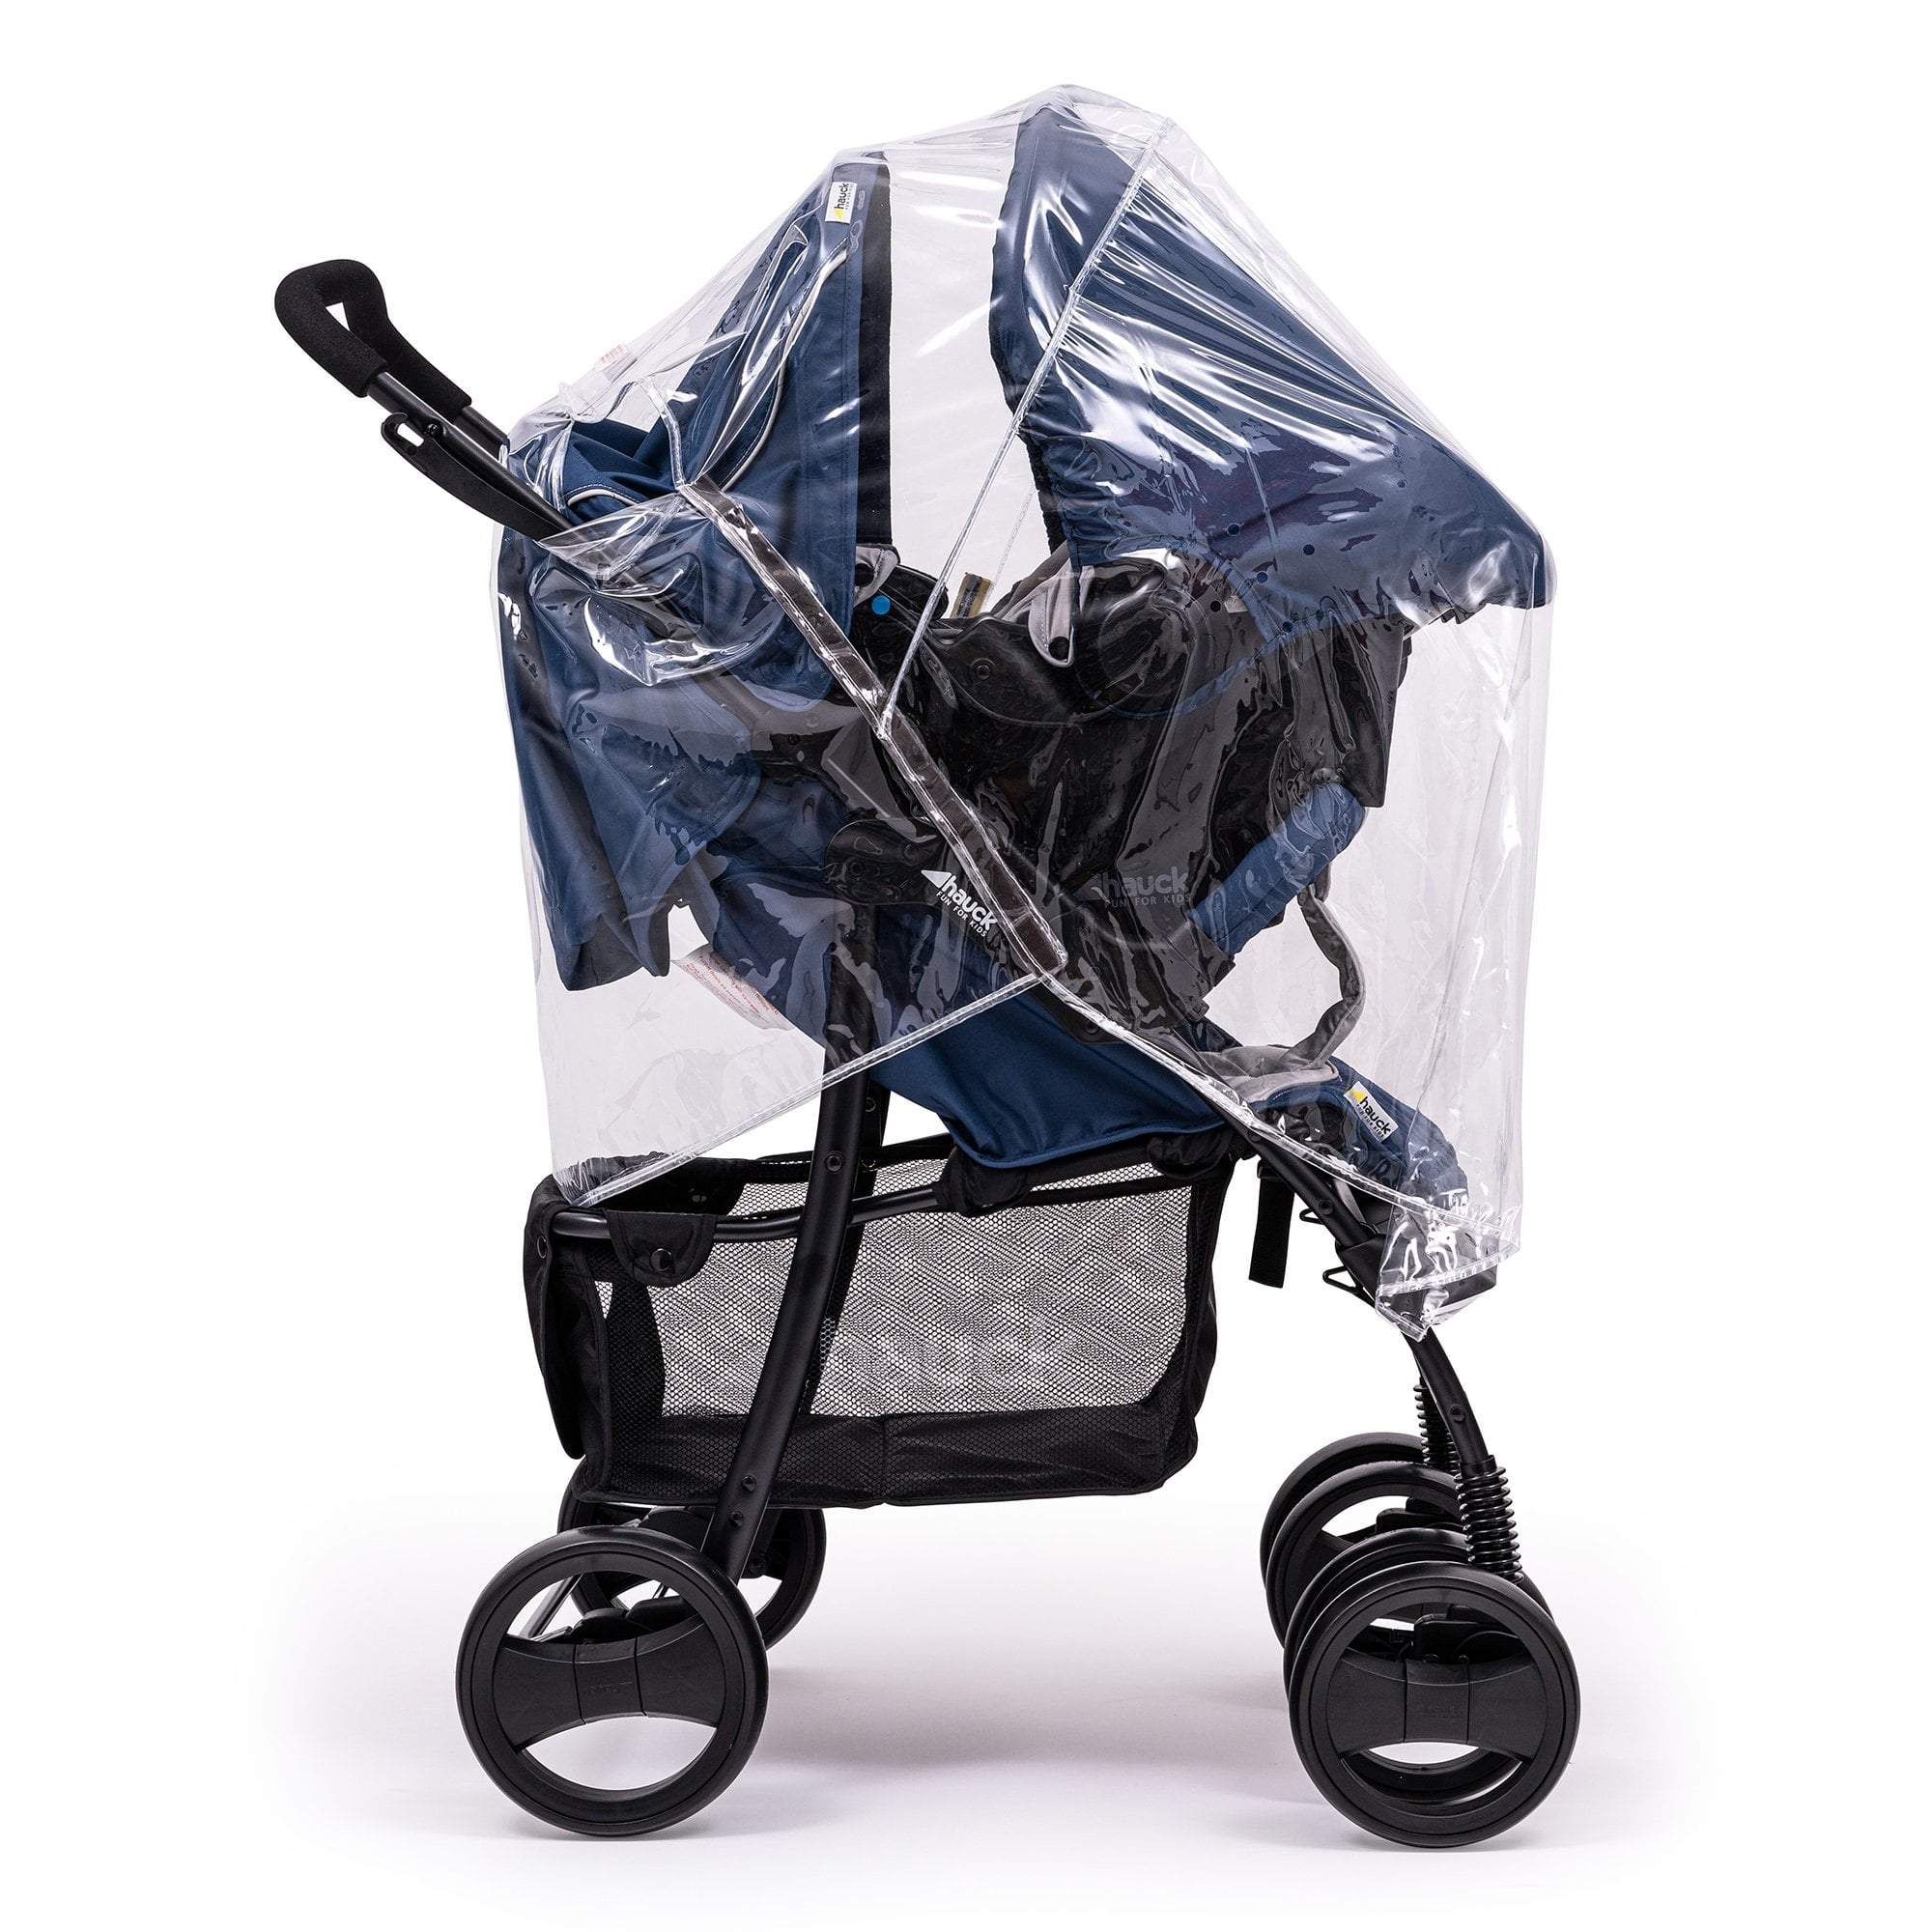 Travel System Raincover Compatible with Joolz - Fits All Models - For Your Little One